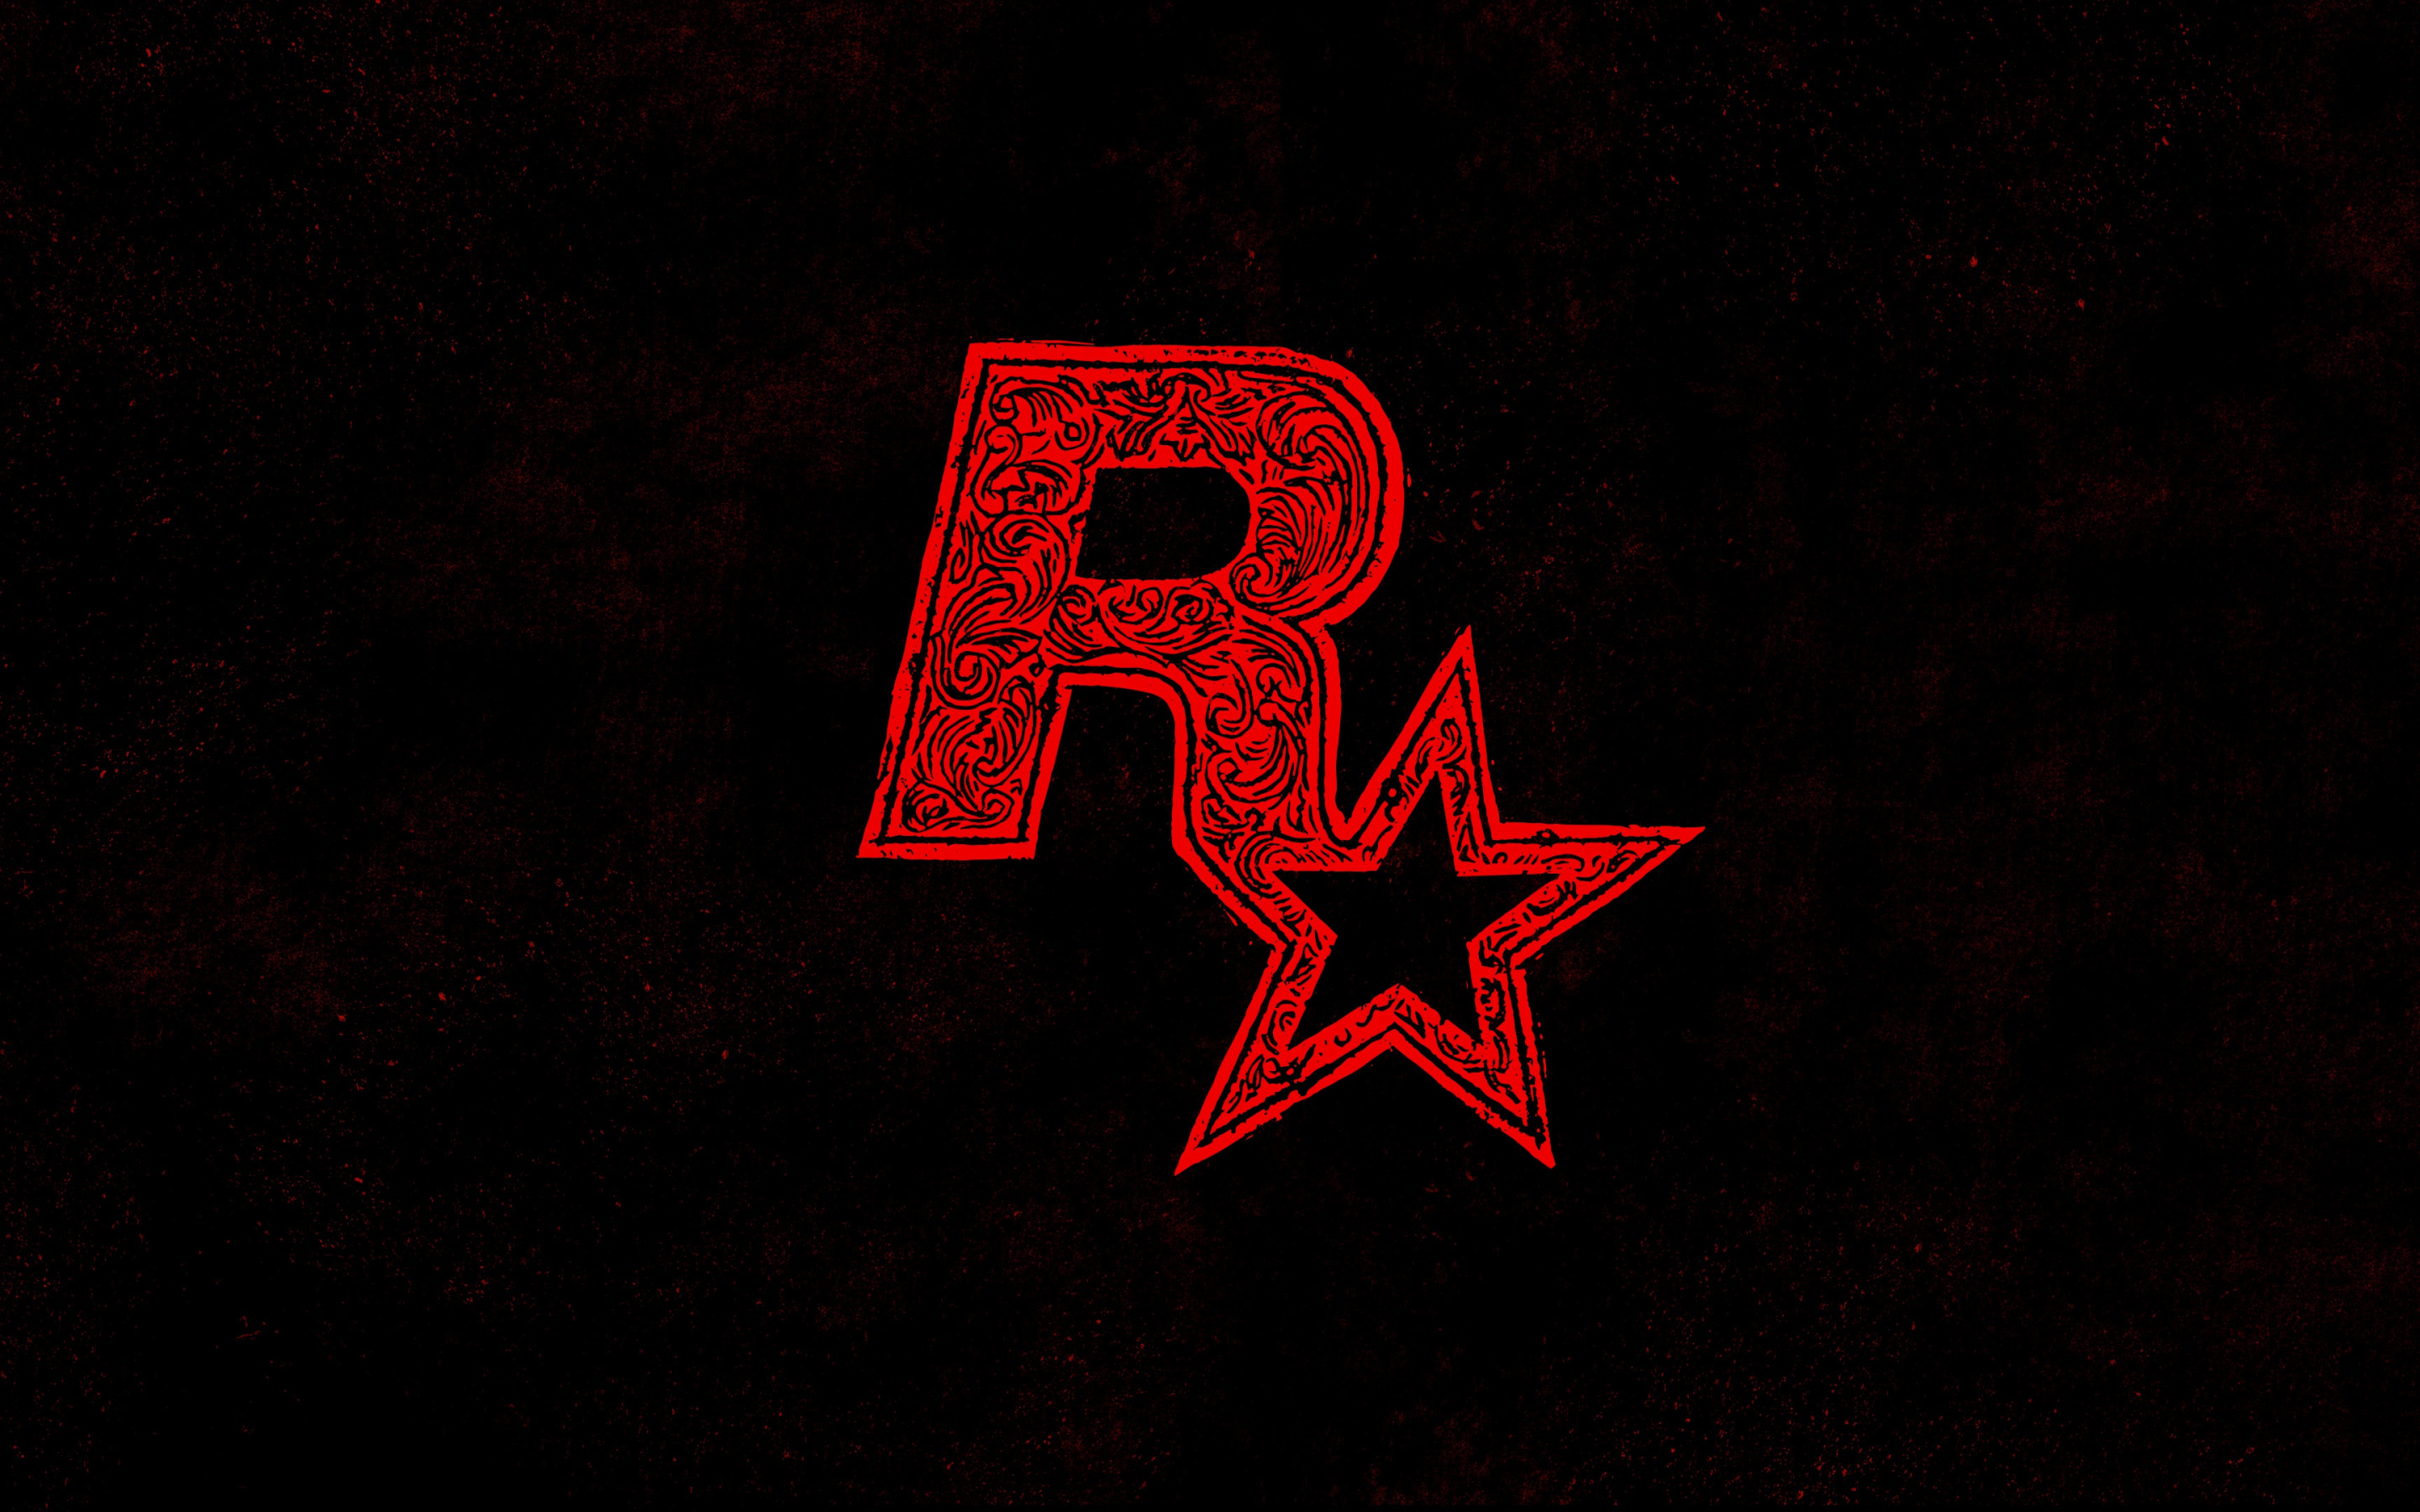 Download wallpapers rockstar creative red logo emblem with ornaments black background for desktop with resolution x high quality hd pictures wallpapers